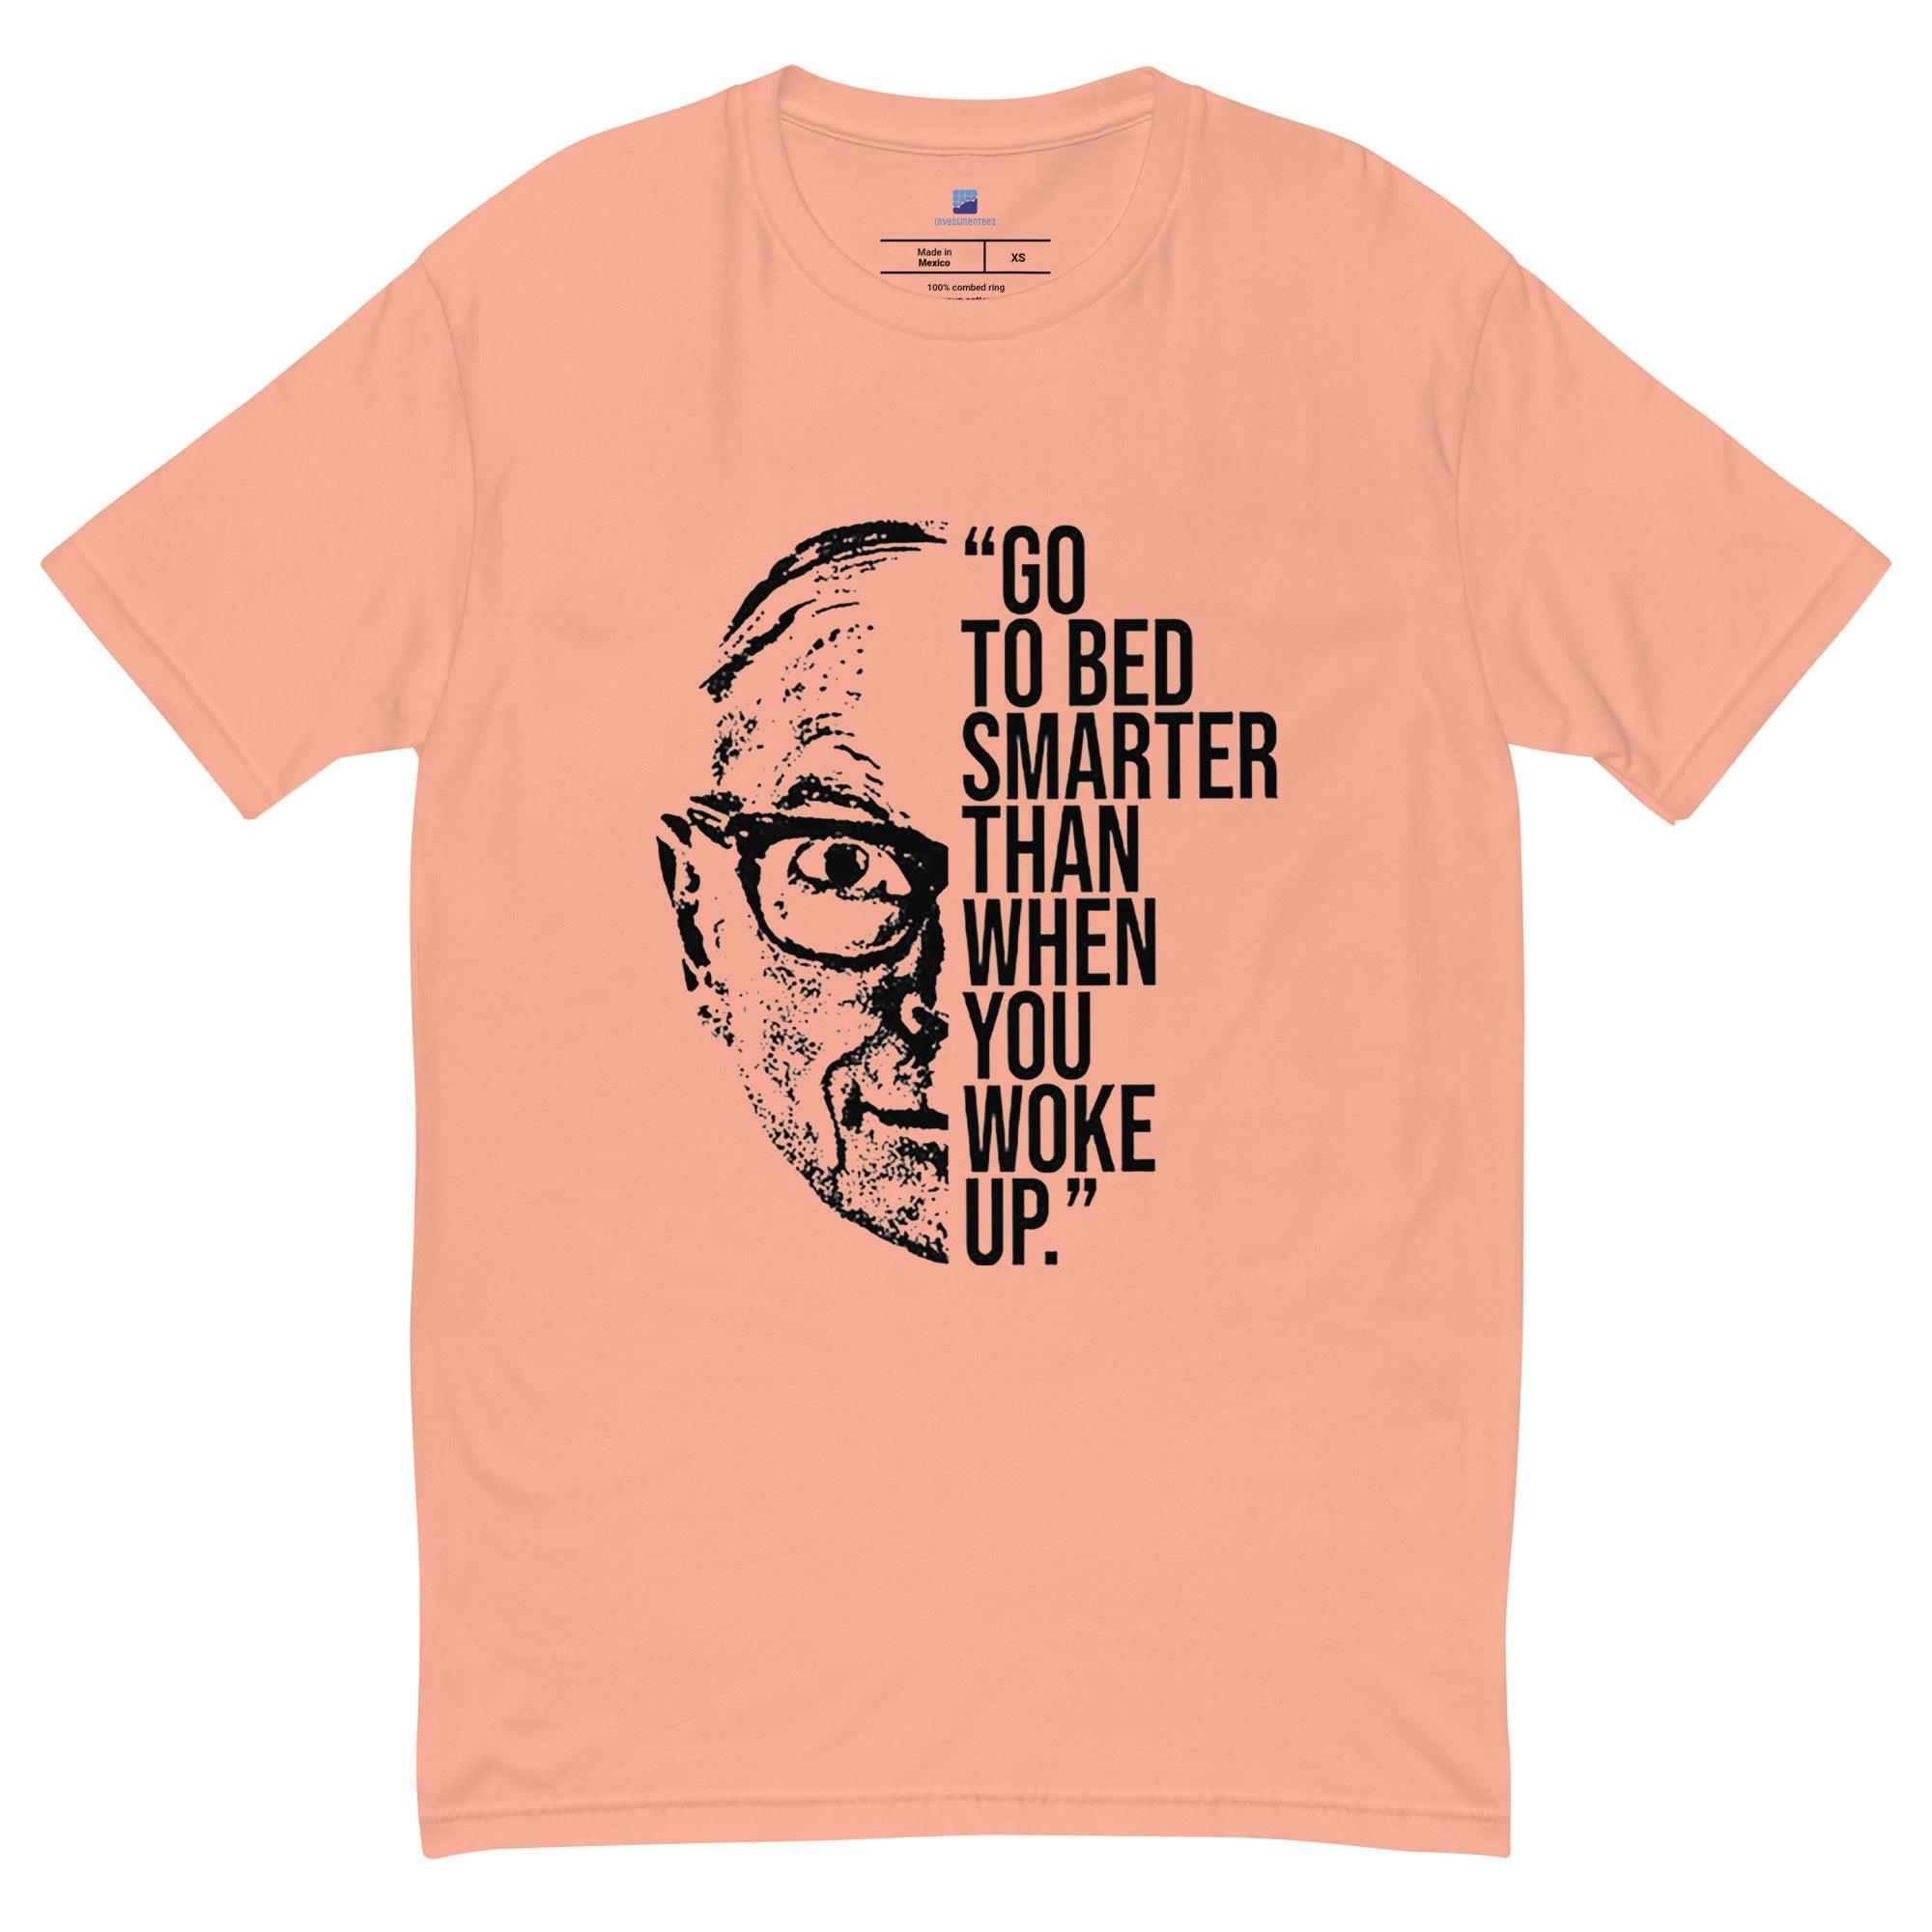 Charlie Munger Wise Words T-Shirt - InvestmenTees